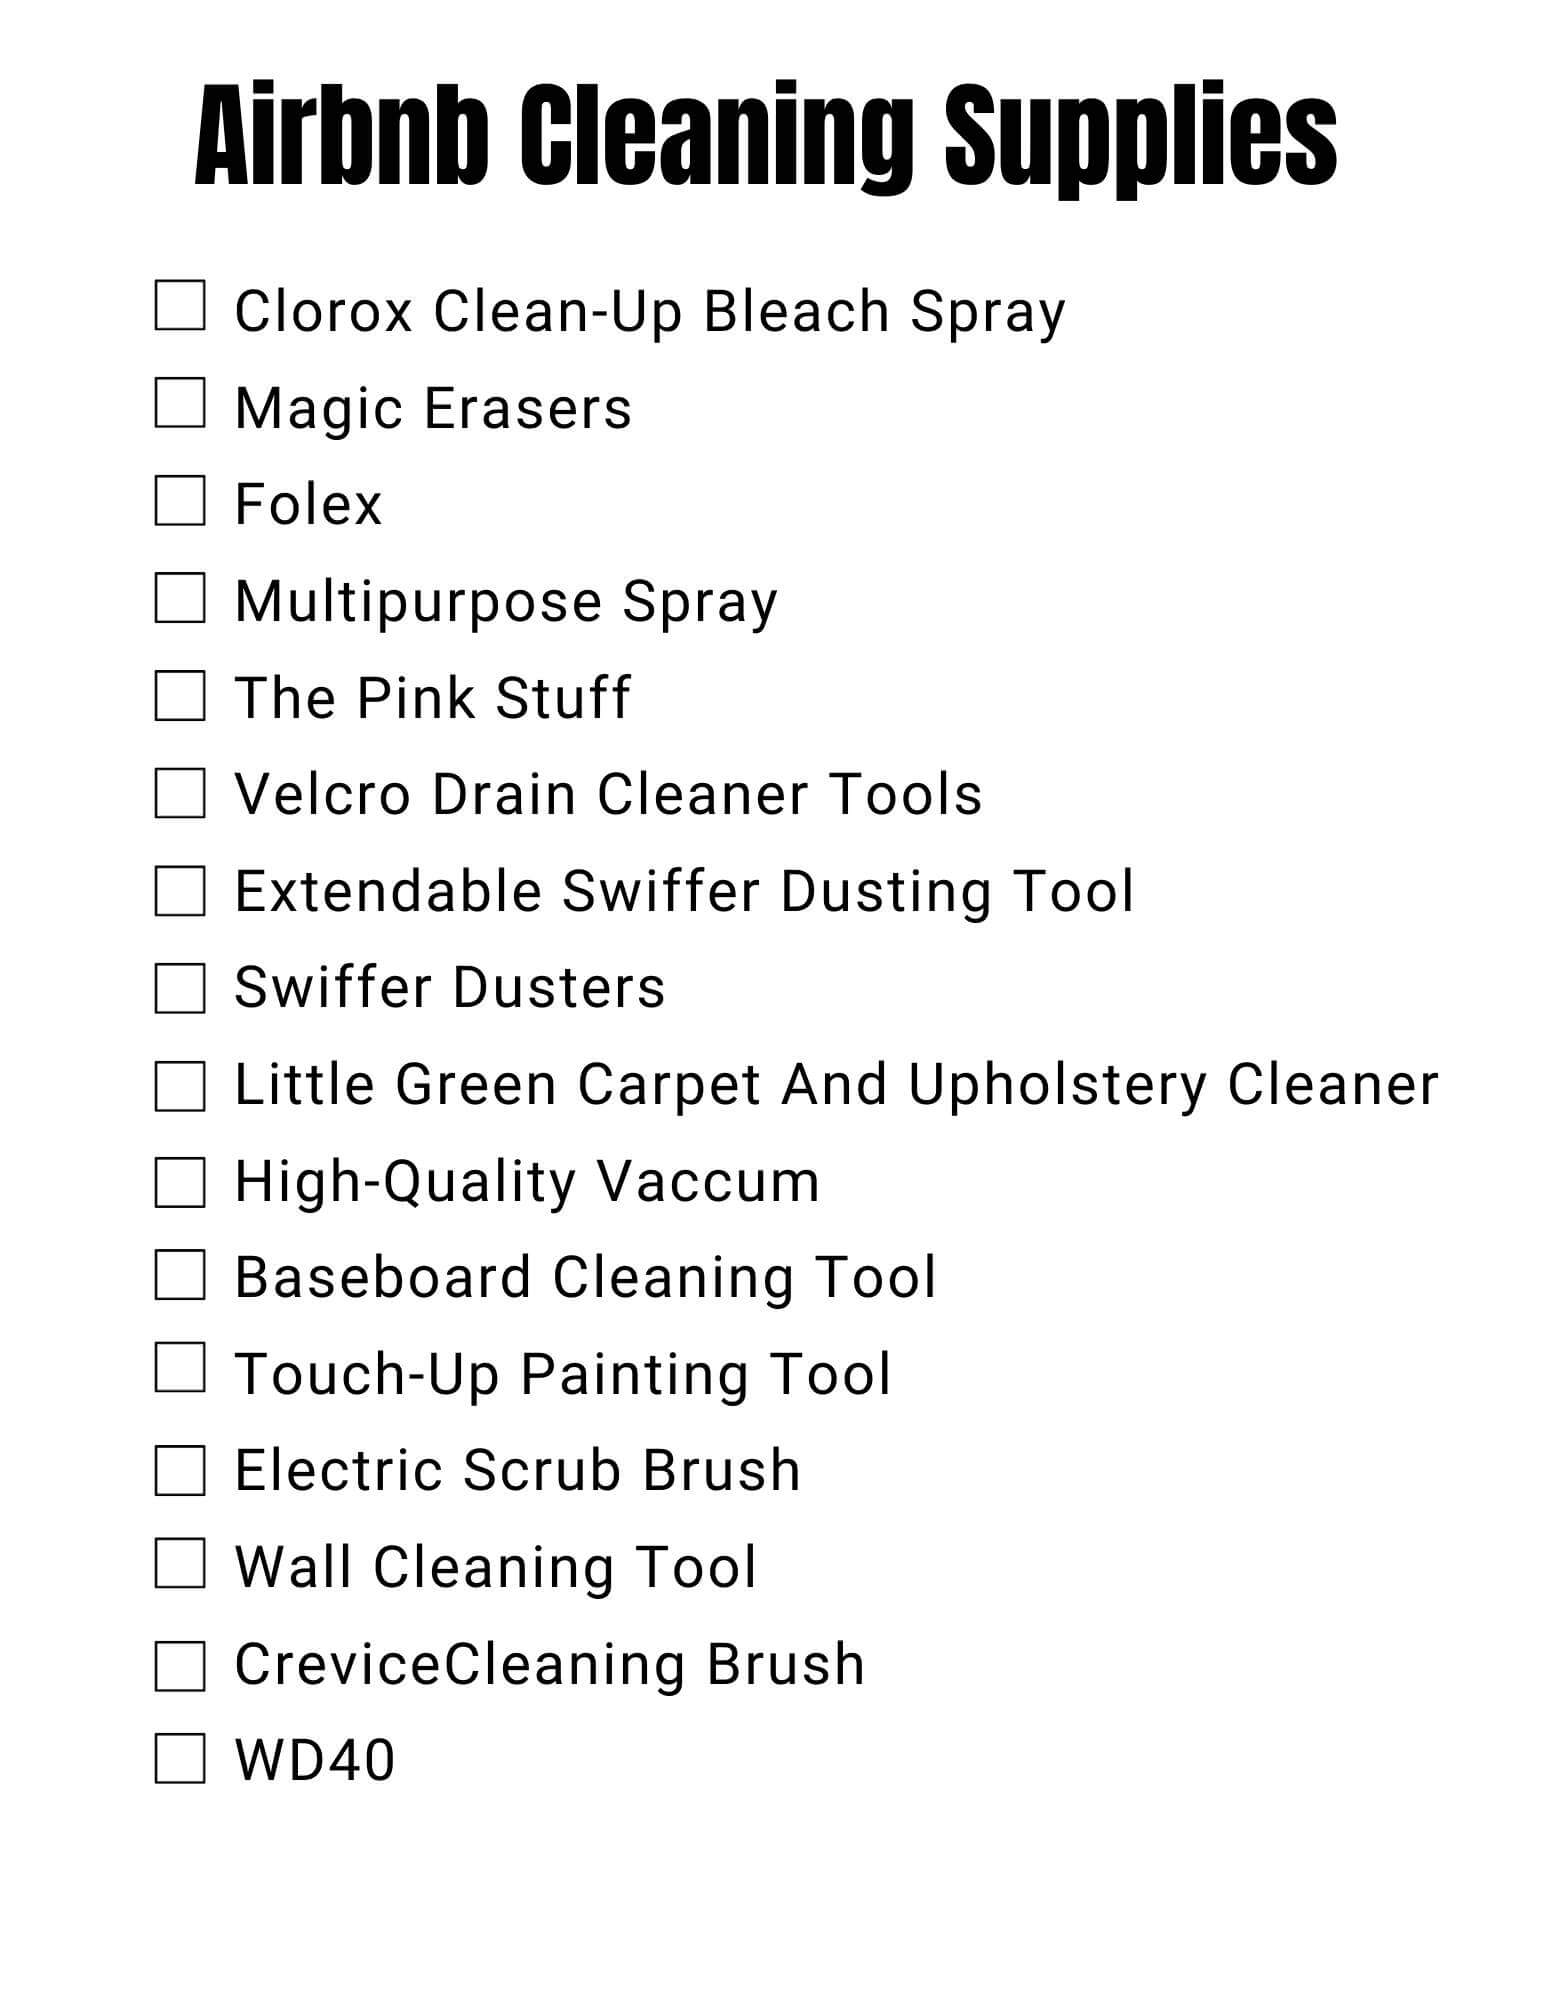 Airbnb Cleaning Supplies